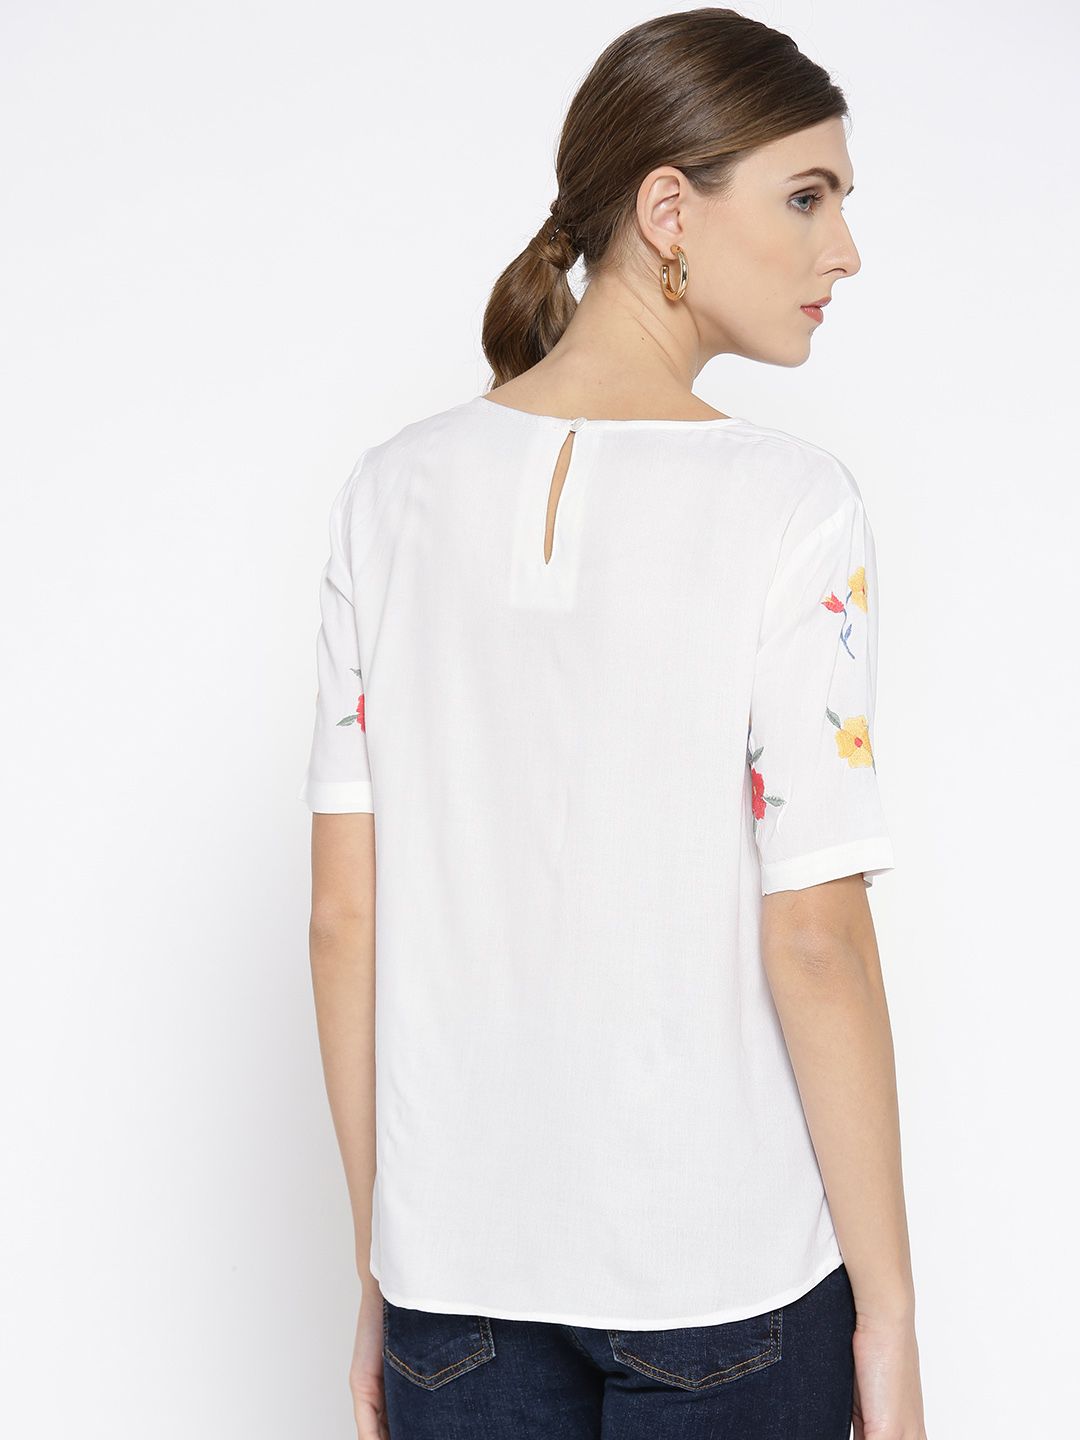 White Embroidered Short Top